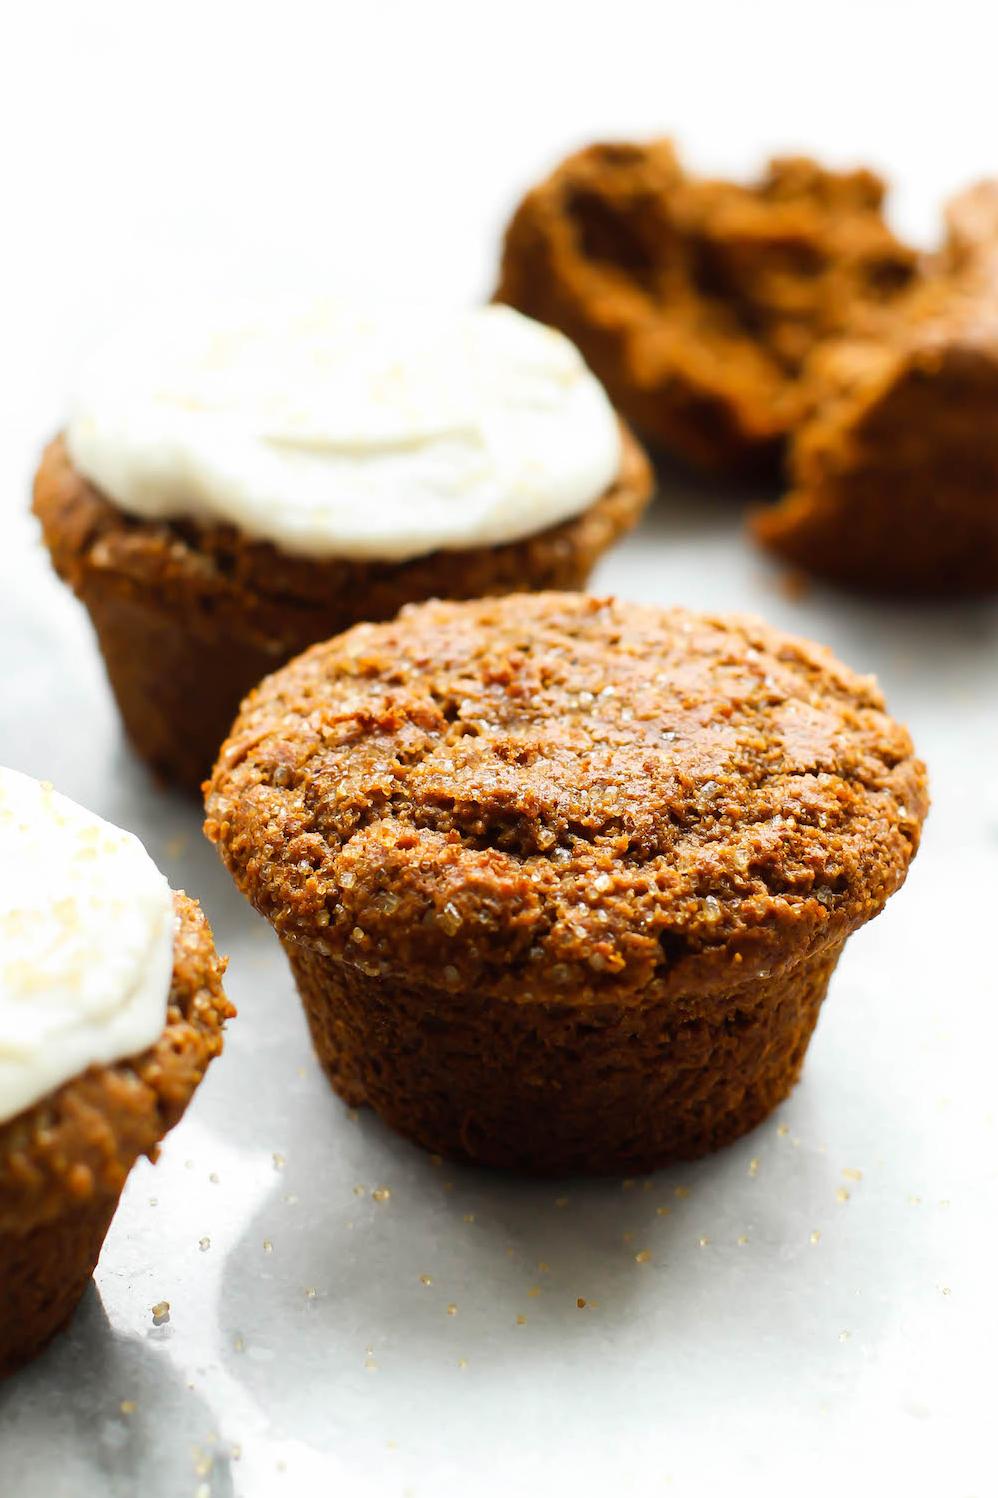  You won't even miss the gluten in these heavenly muffins.